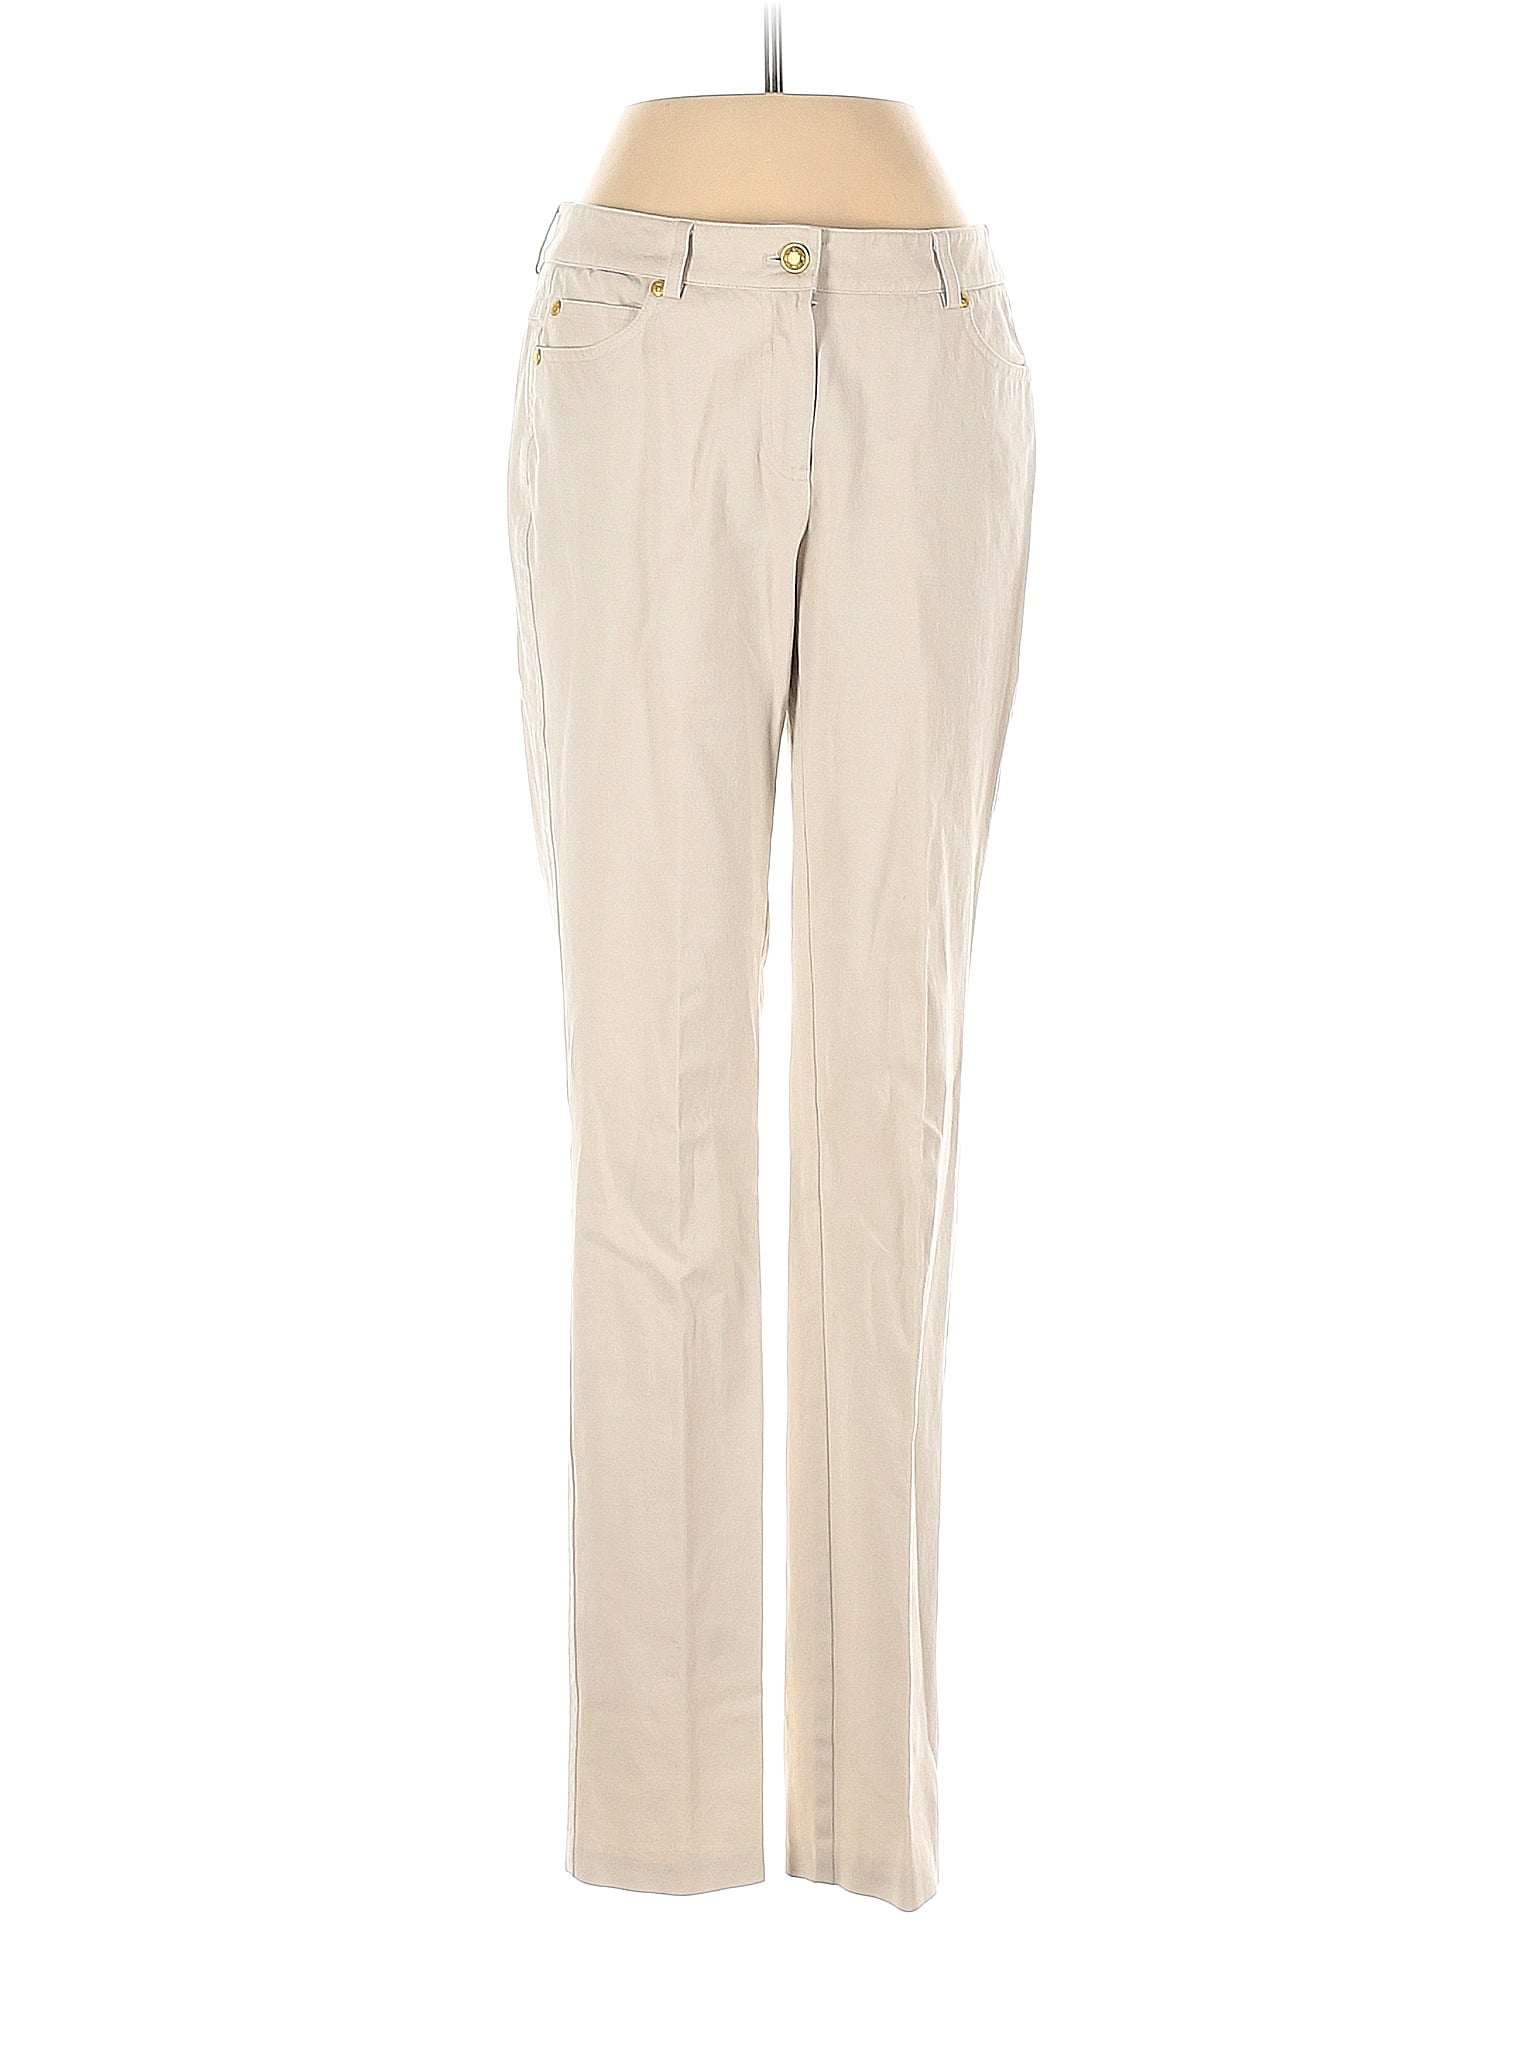 J. McLaughlin Solid Tan Ivory Casual Pants Size 2 - 84% off | ThredUp